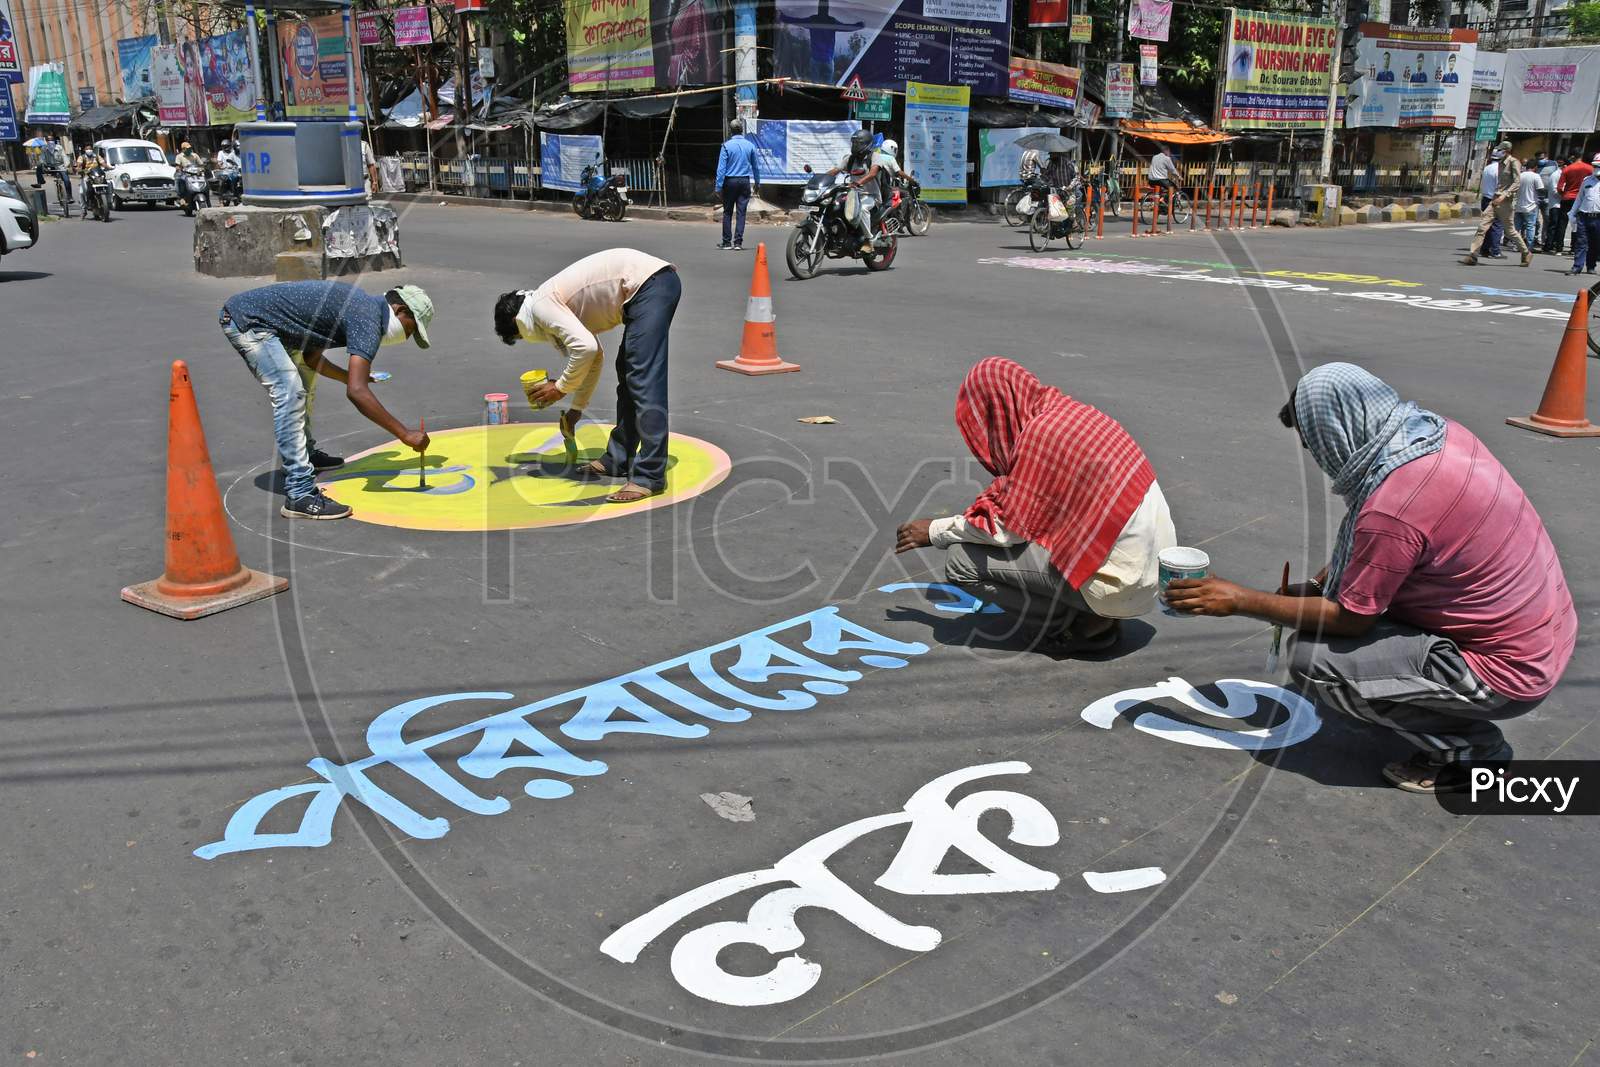 Slogans are painted on the road as part of a campaign to get people to comply with the lockdown to prevent coronavirus Covid-19. At Burdwan Town, Purba Bardhaman District, West Bengal, India.